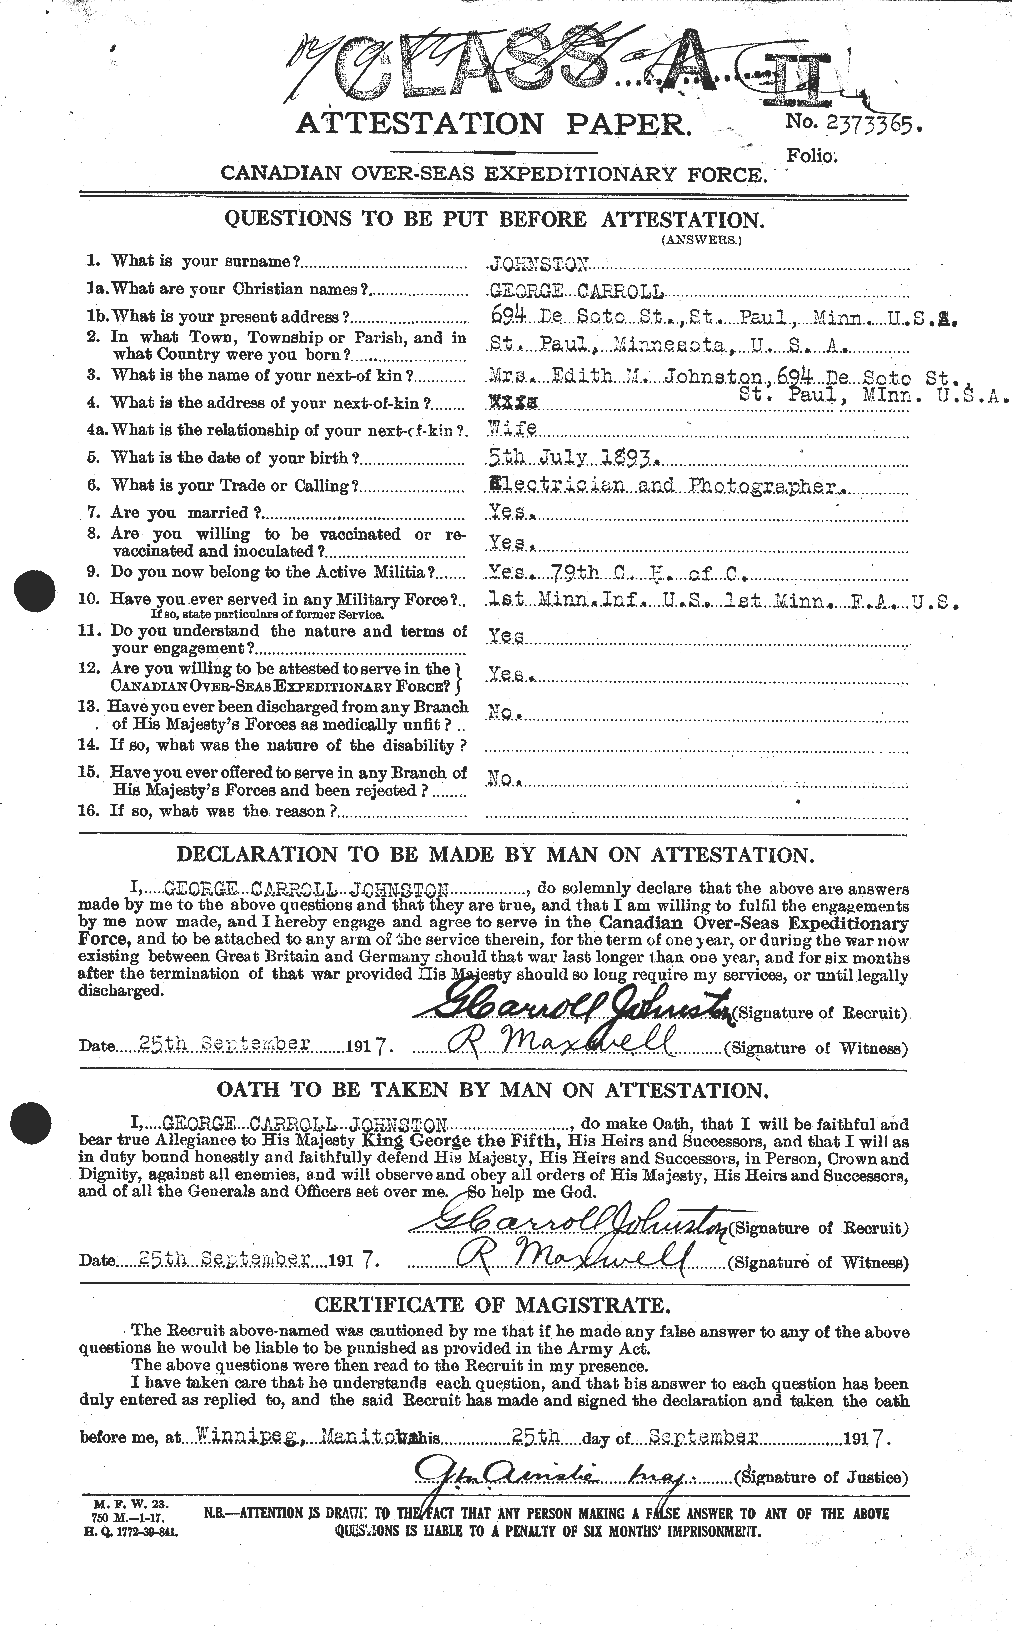 Personnel Records of the First World War - CEF 424124a